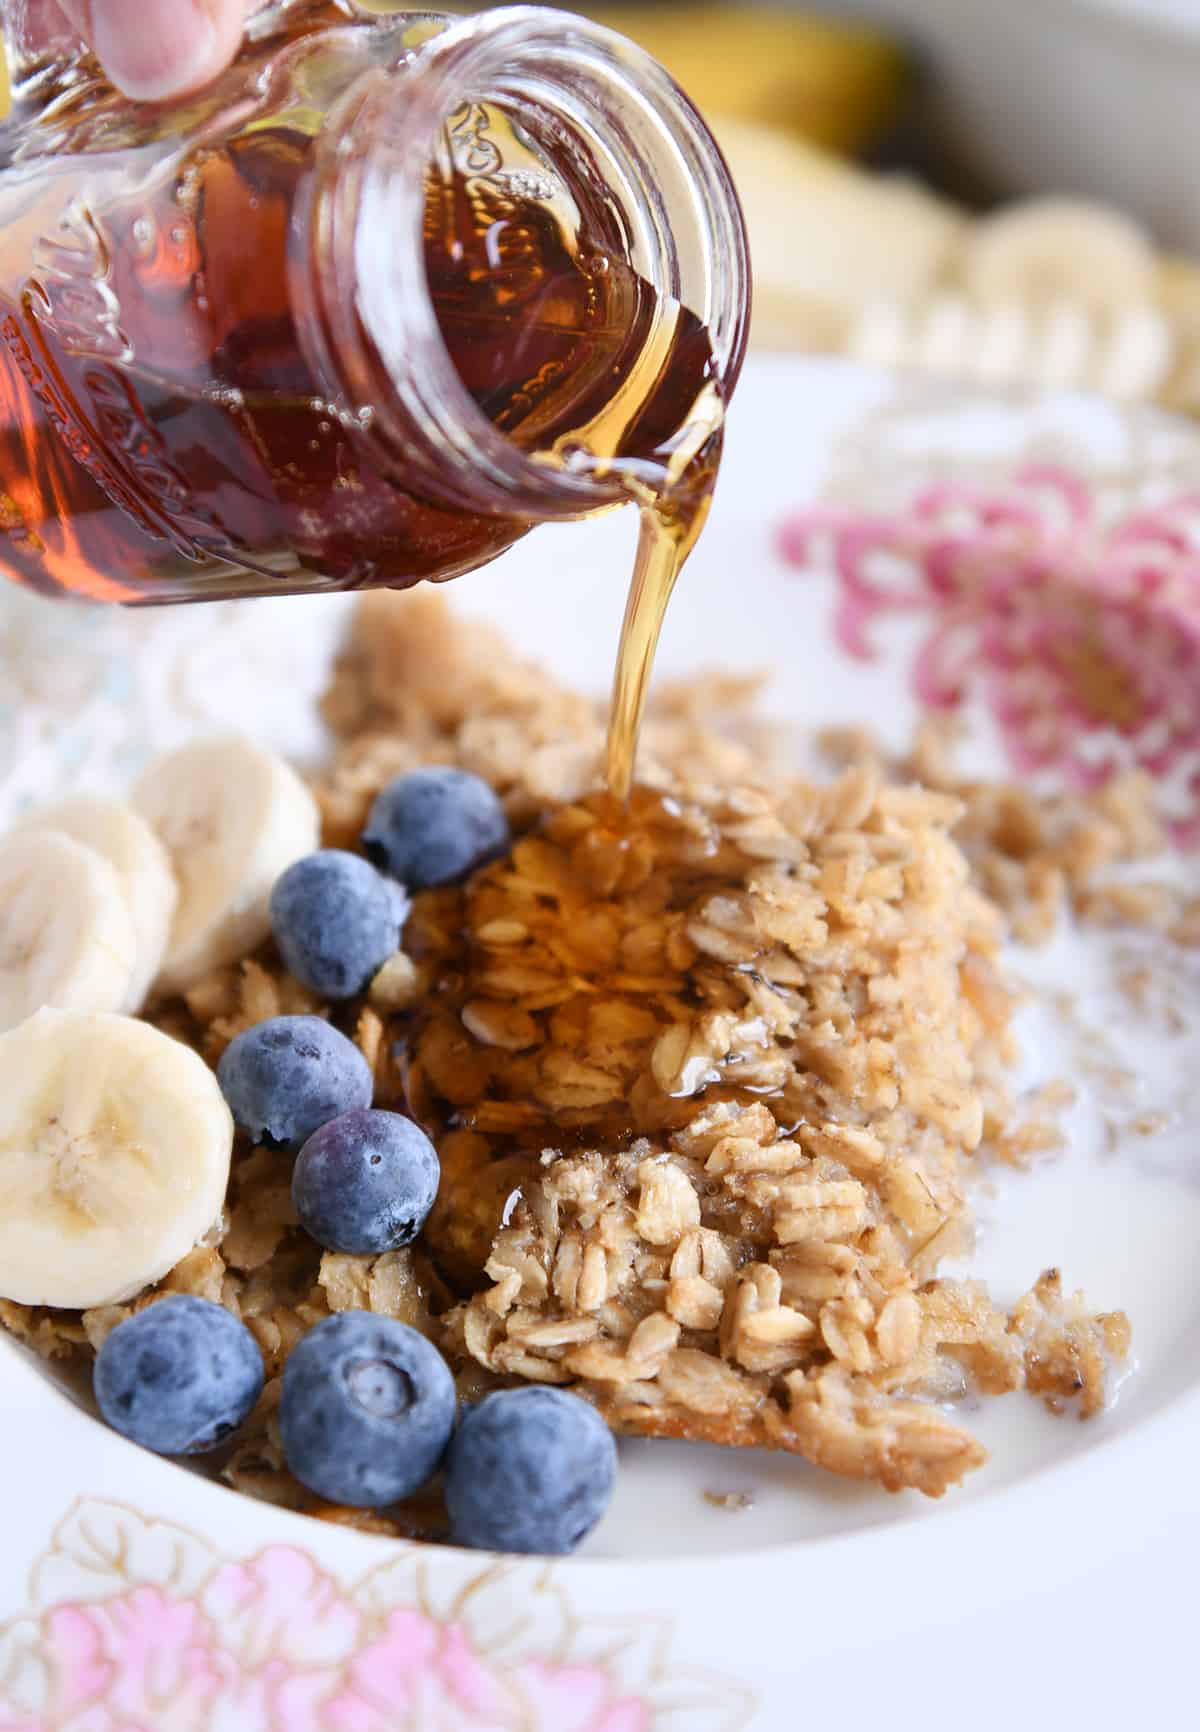 Pouring maple syrup over bowl of amish baked oatmeal with blueberries and sliced bananas.